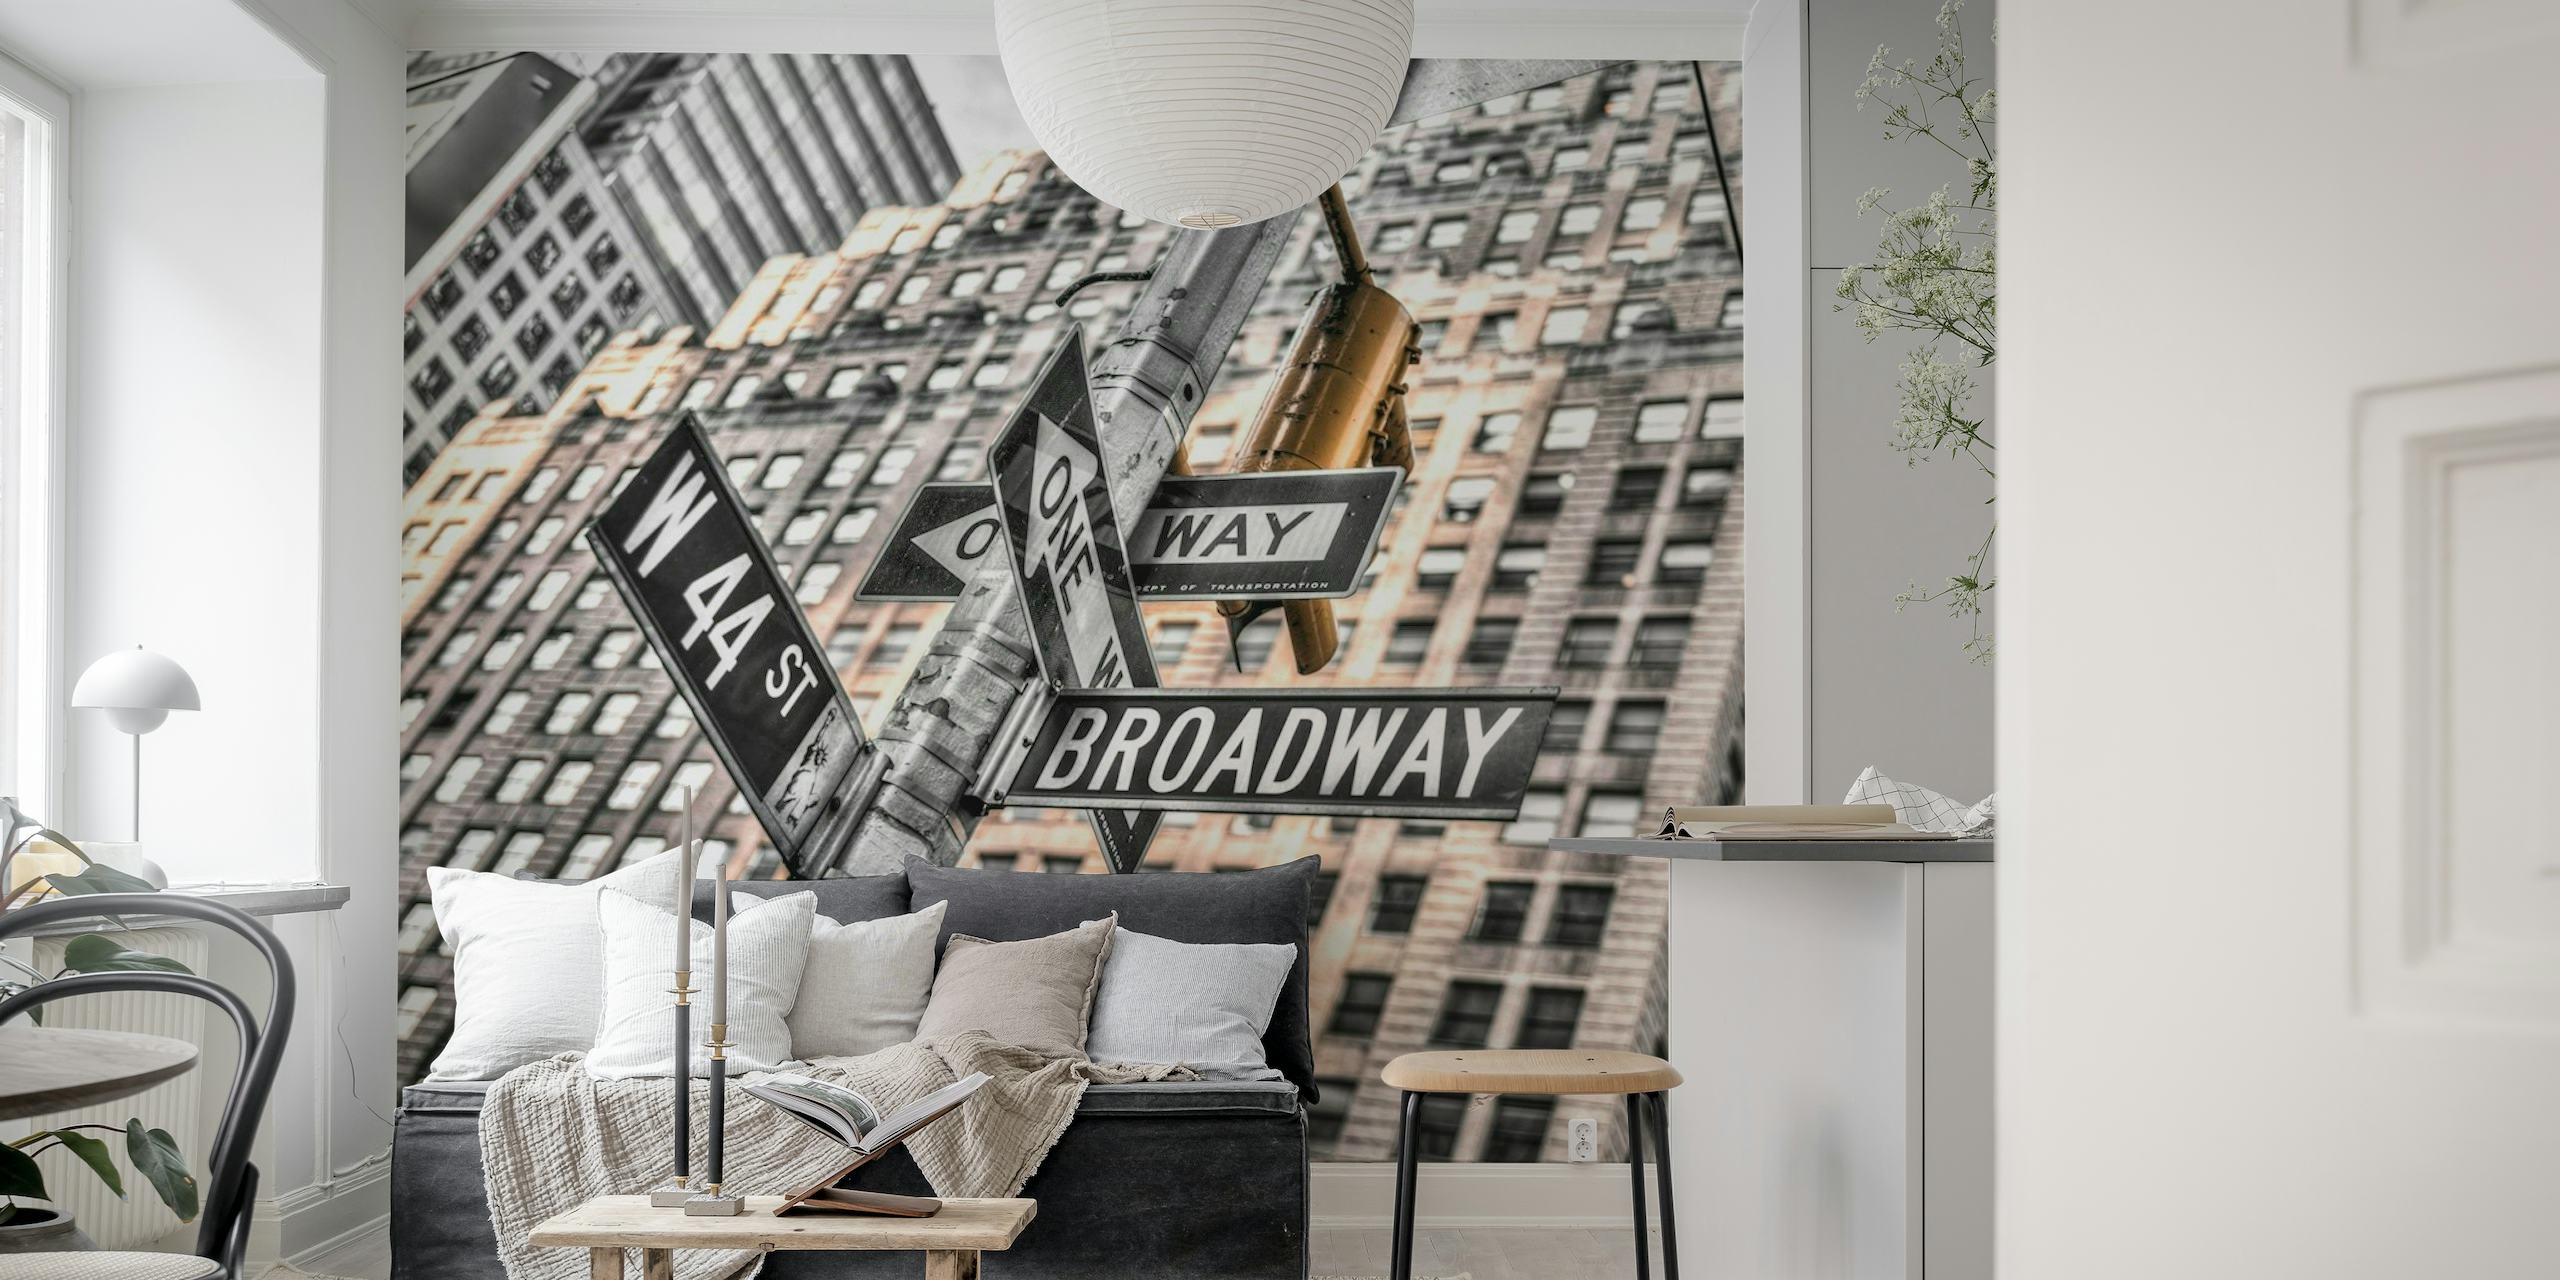 Broadway street sign wall mural with skyscrapers